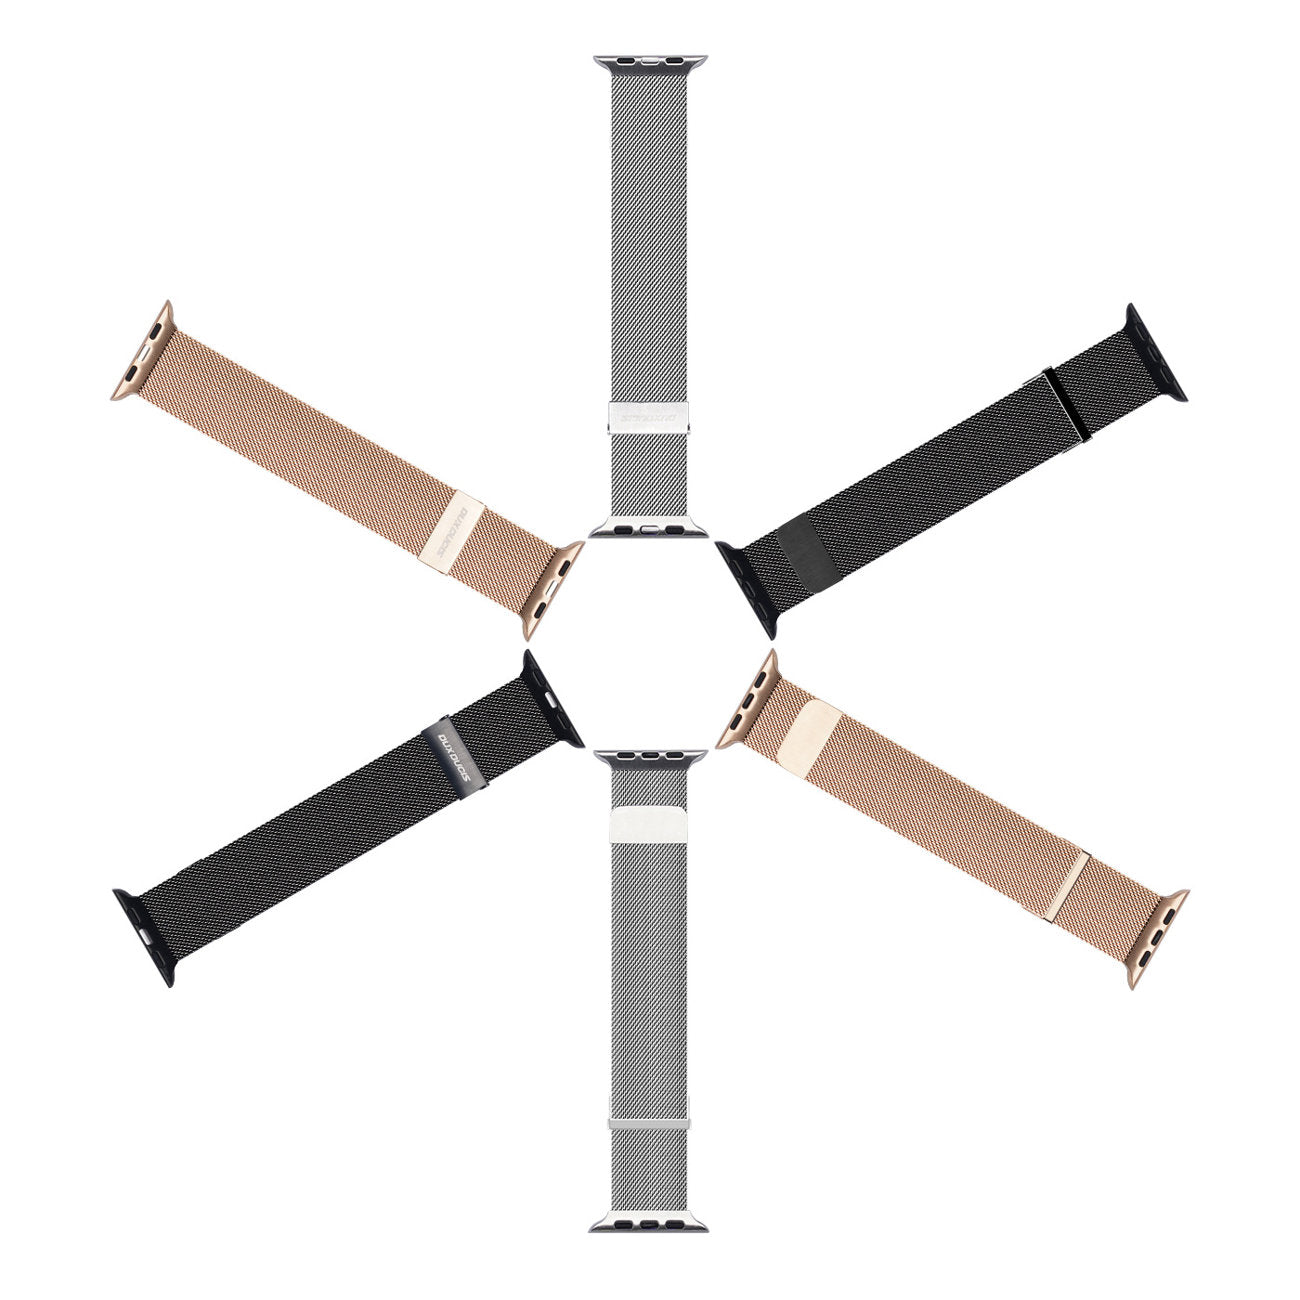 Dux Ducis Magnetic Strap strap for Watch Ultra / 9 / 8 / 7 / 6 / 5 / 4 / 3 / 2 / SE (49 / 45 / 44 / 42 mm) magnetic band black (Milanese Version)